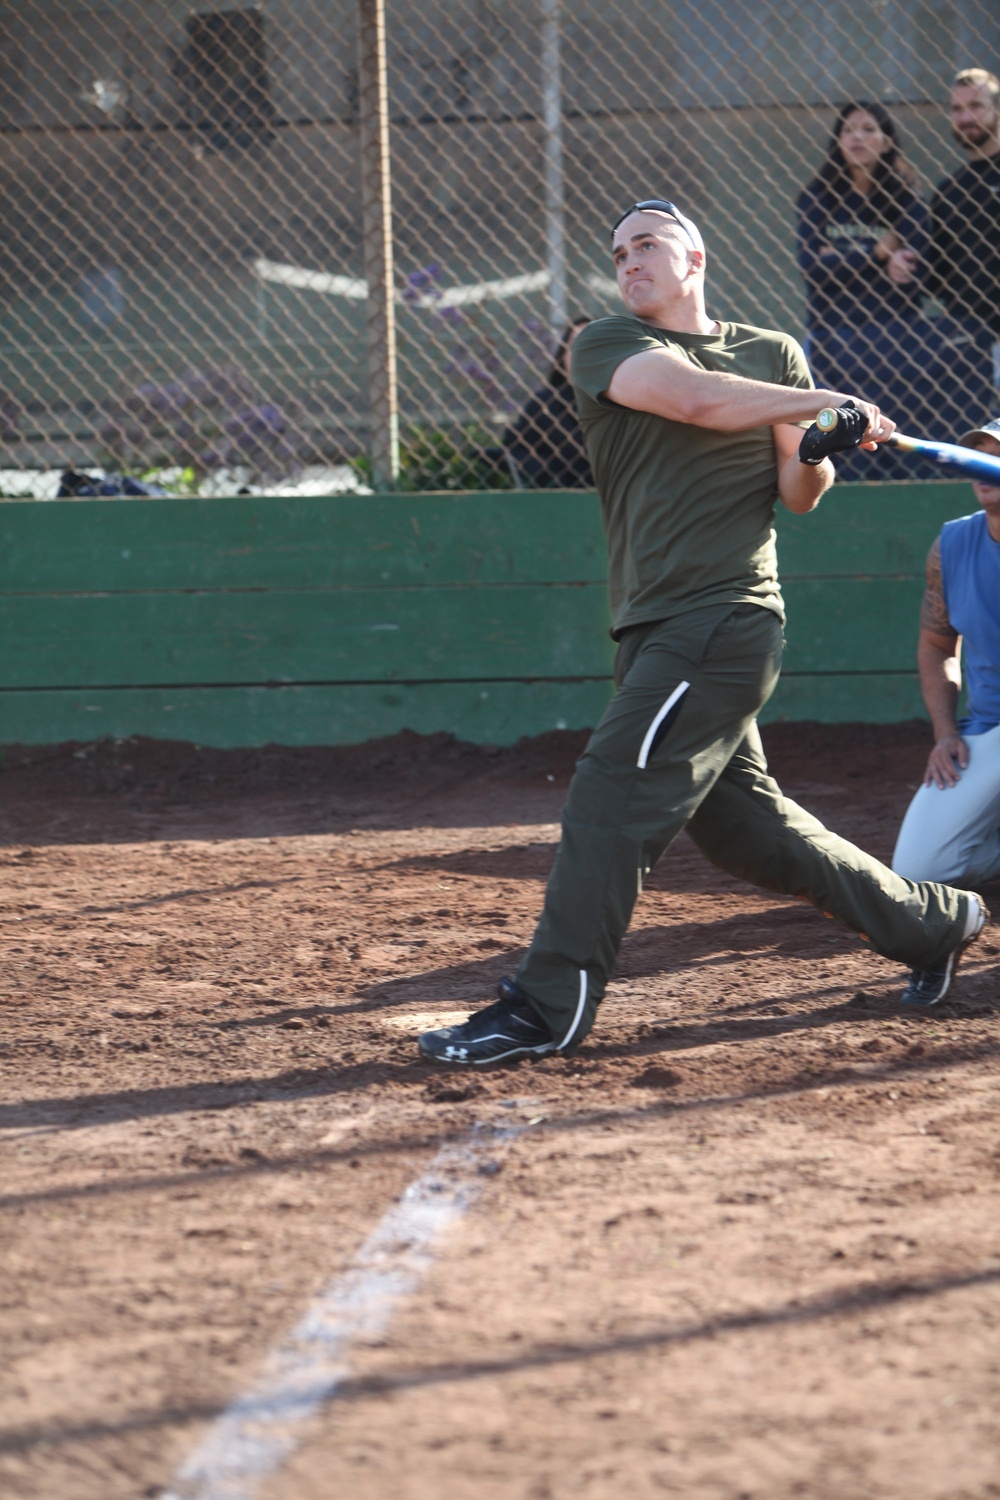 Marines challenge San Francisco police, firefighters in softball